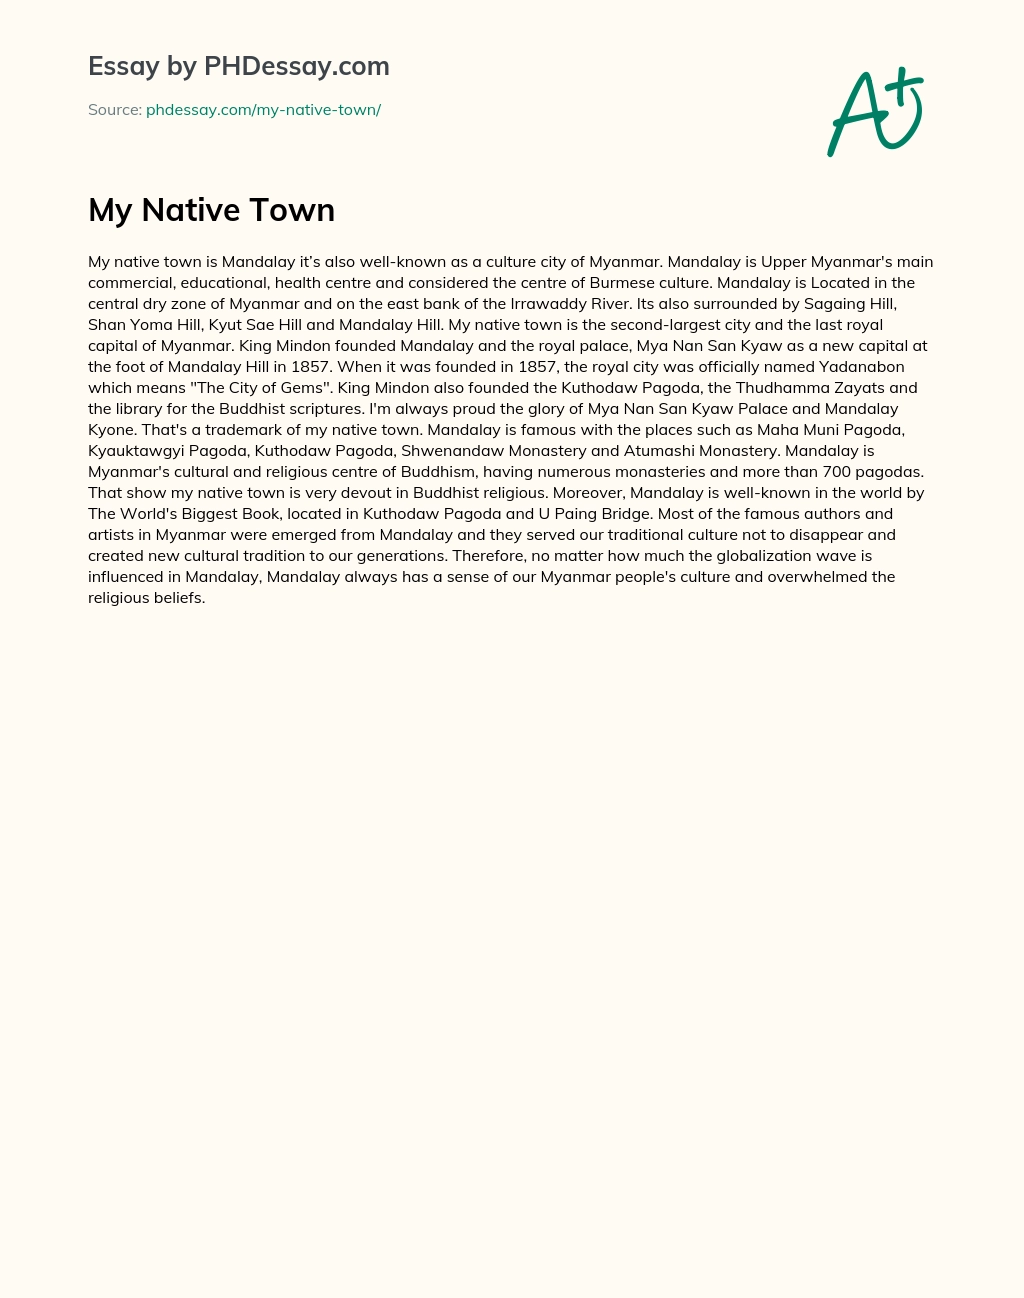 My Native Town essay